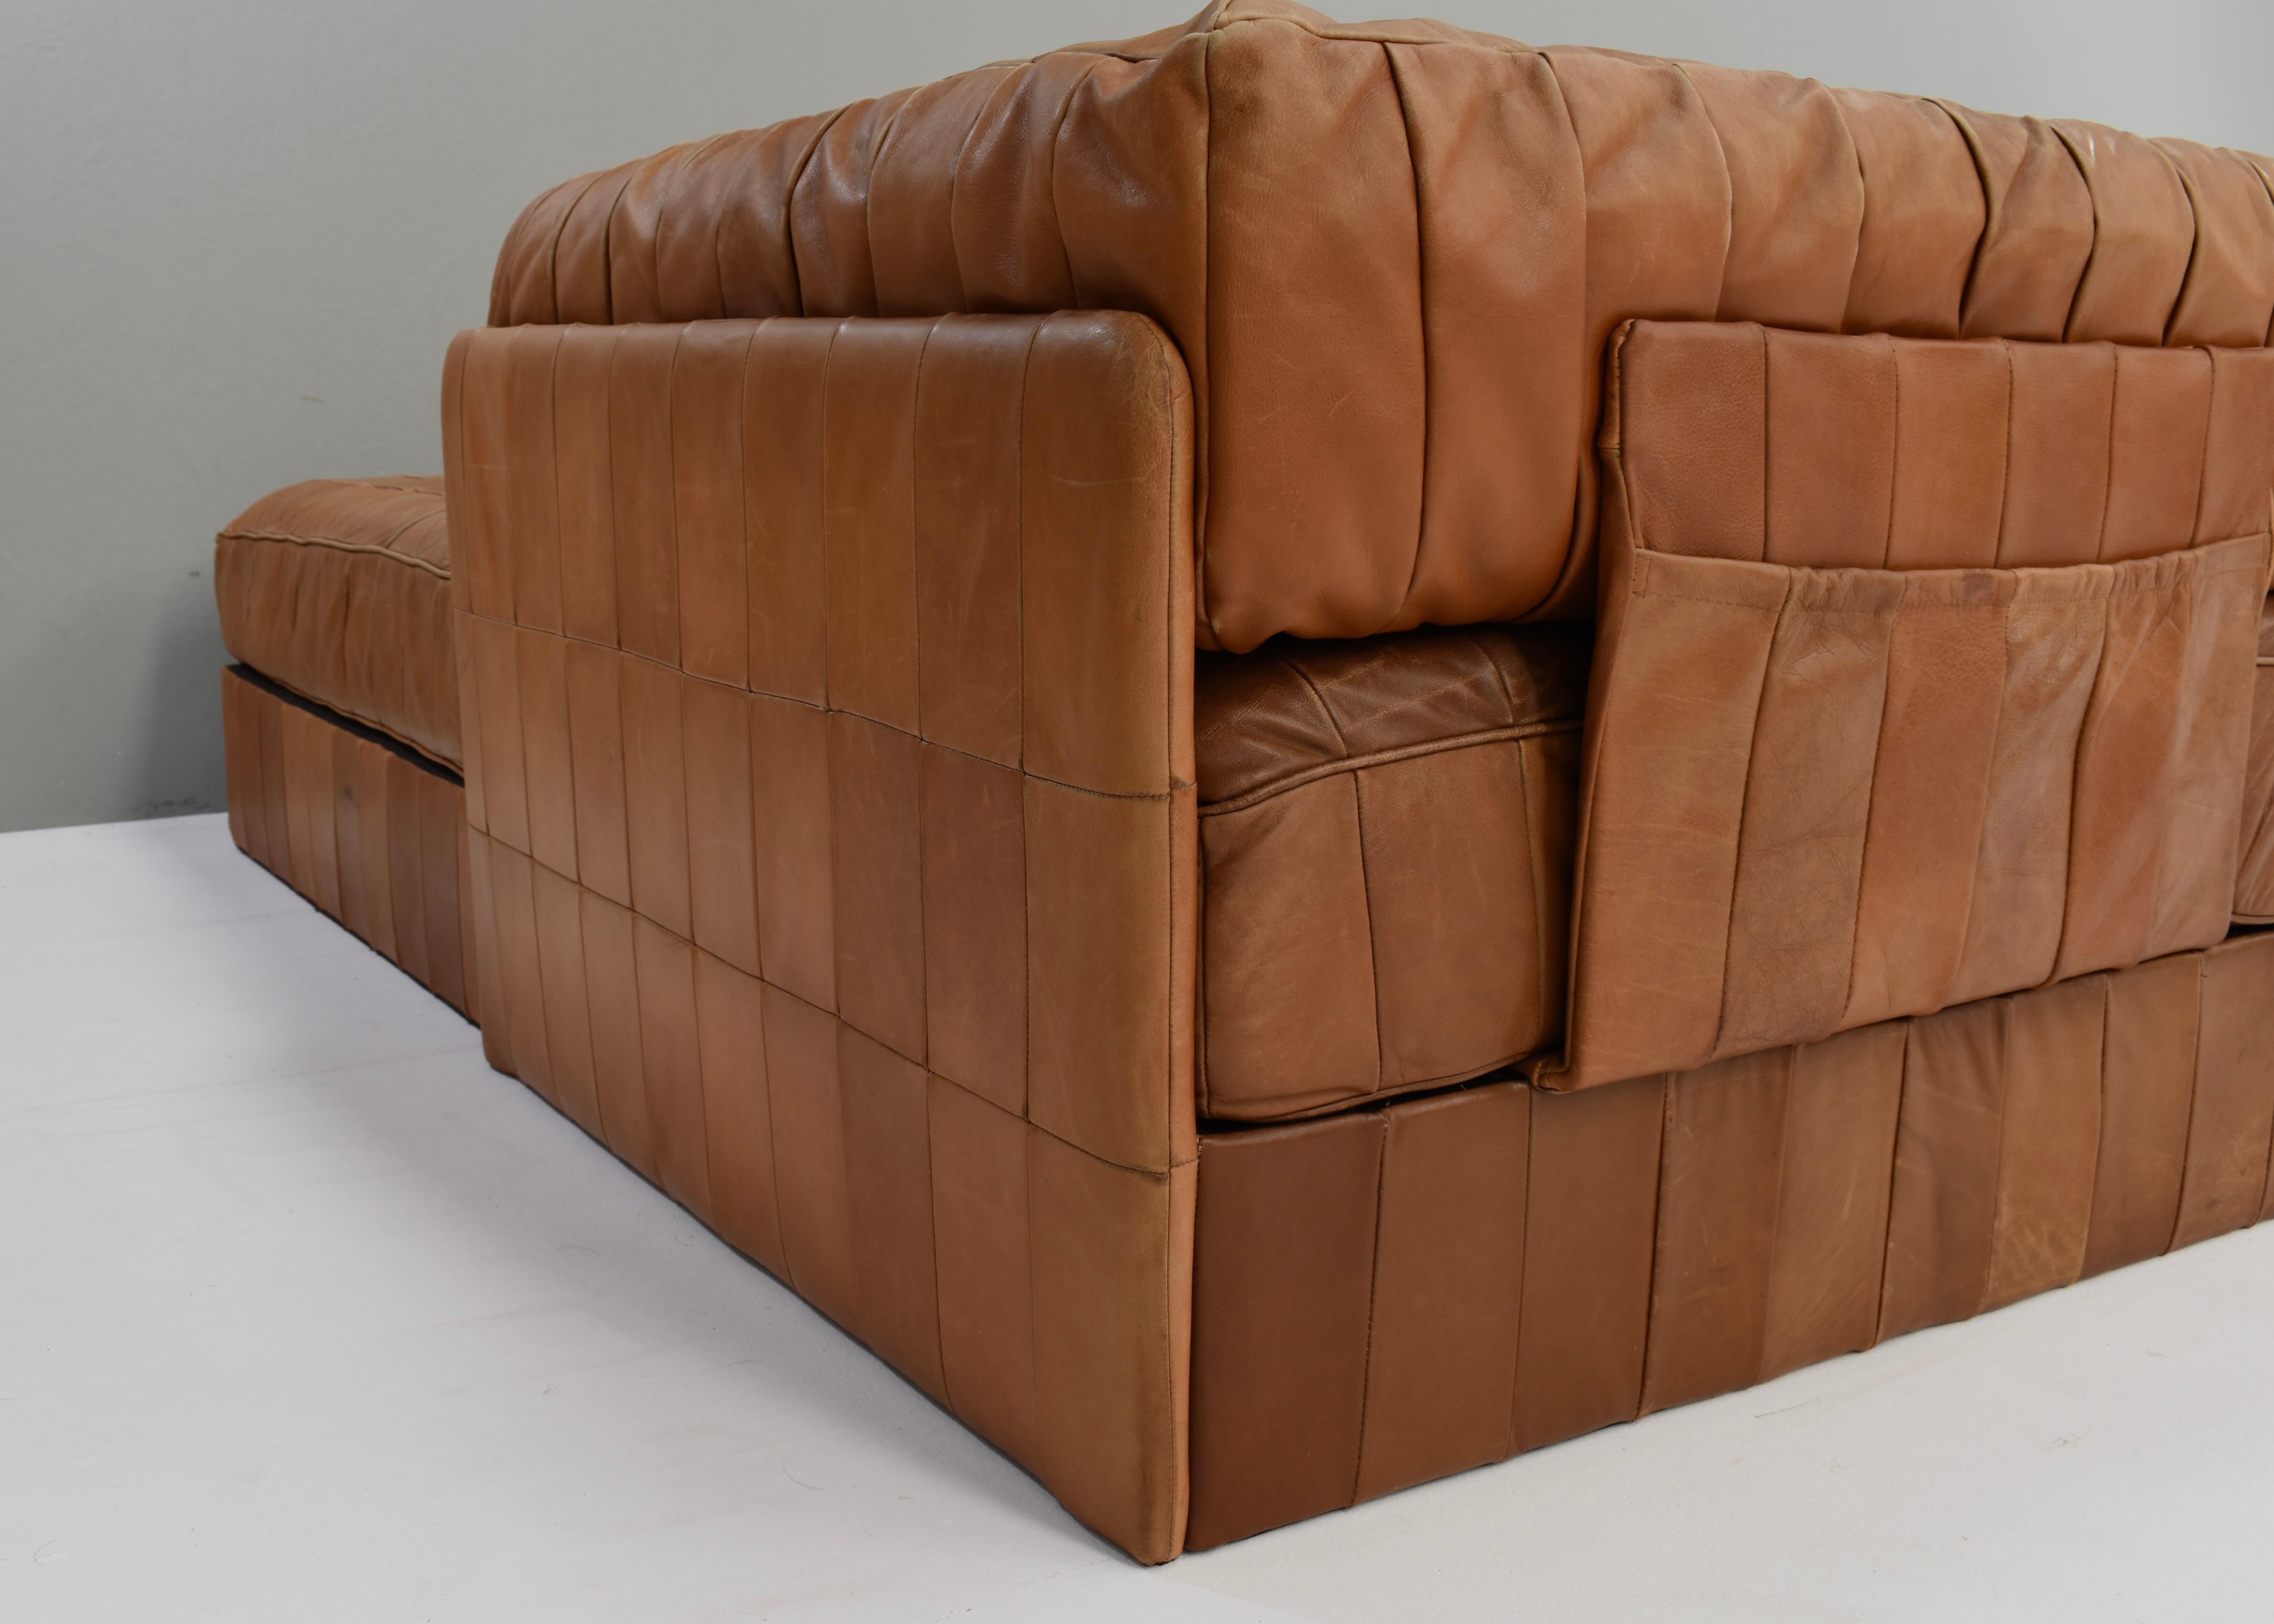 De Sede DS-88 Sectional Sofa in Cognac Brown Tan Leather, Switzerland, 1970's For Sale 9